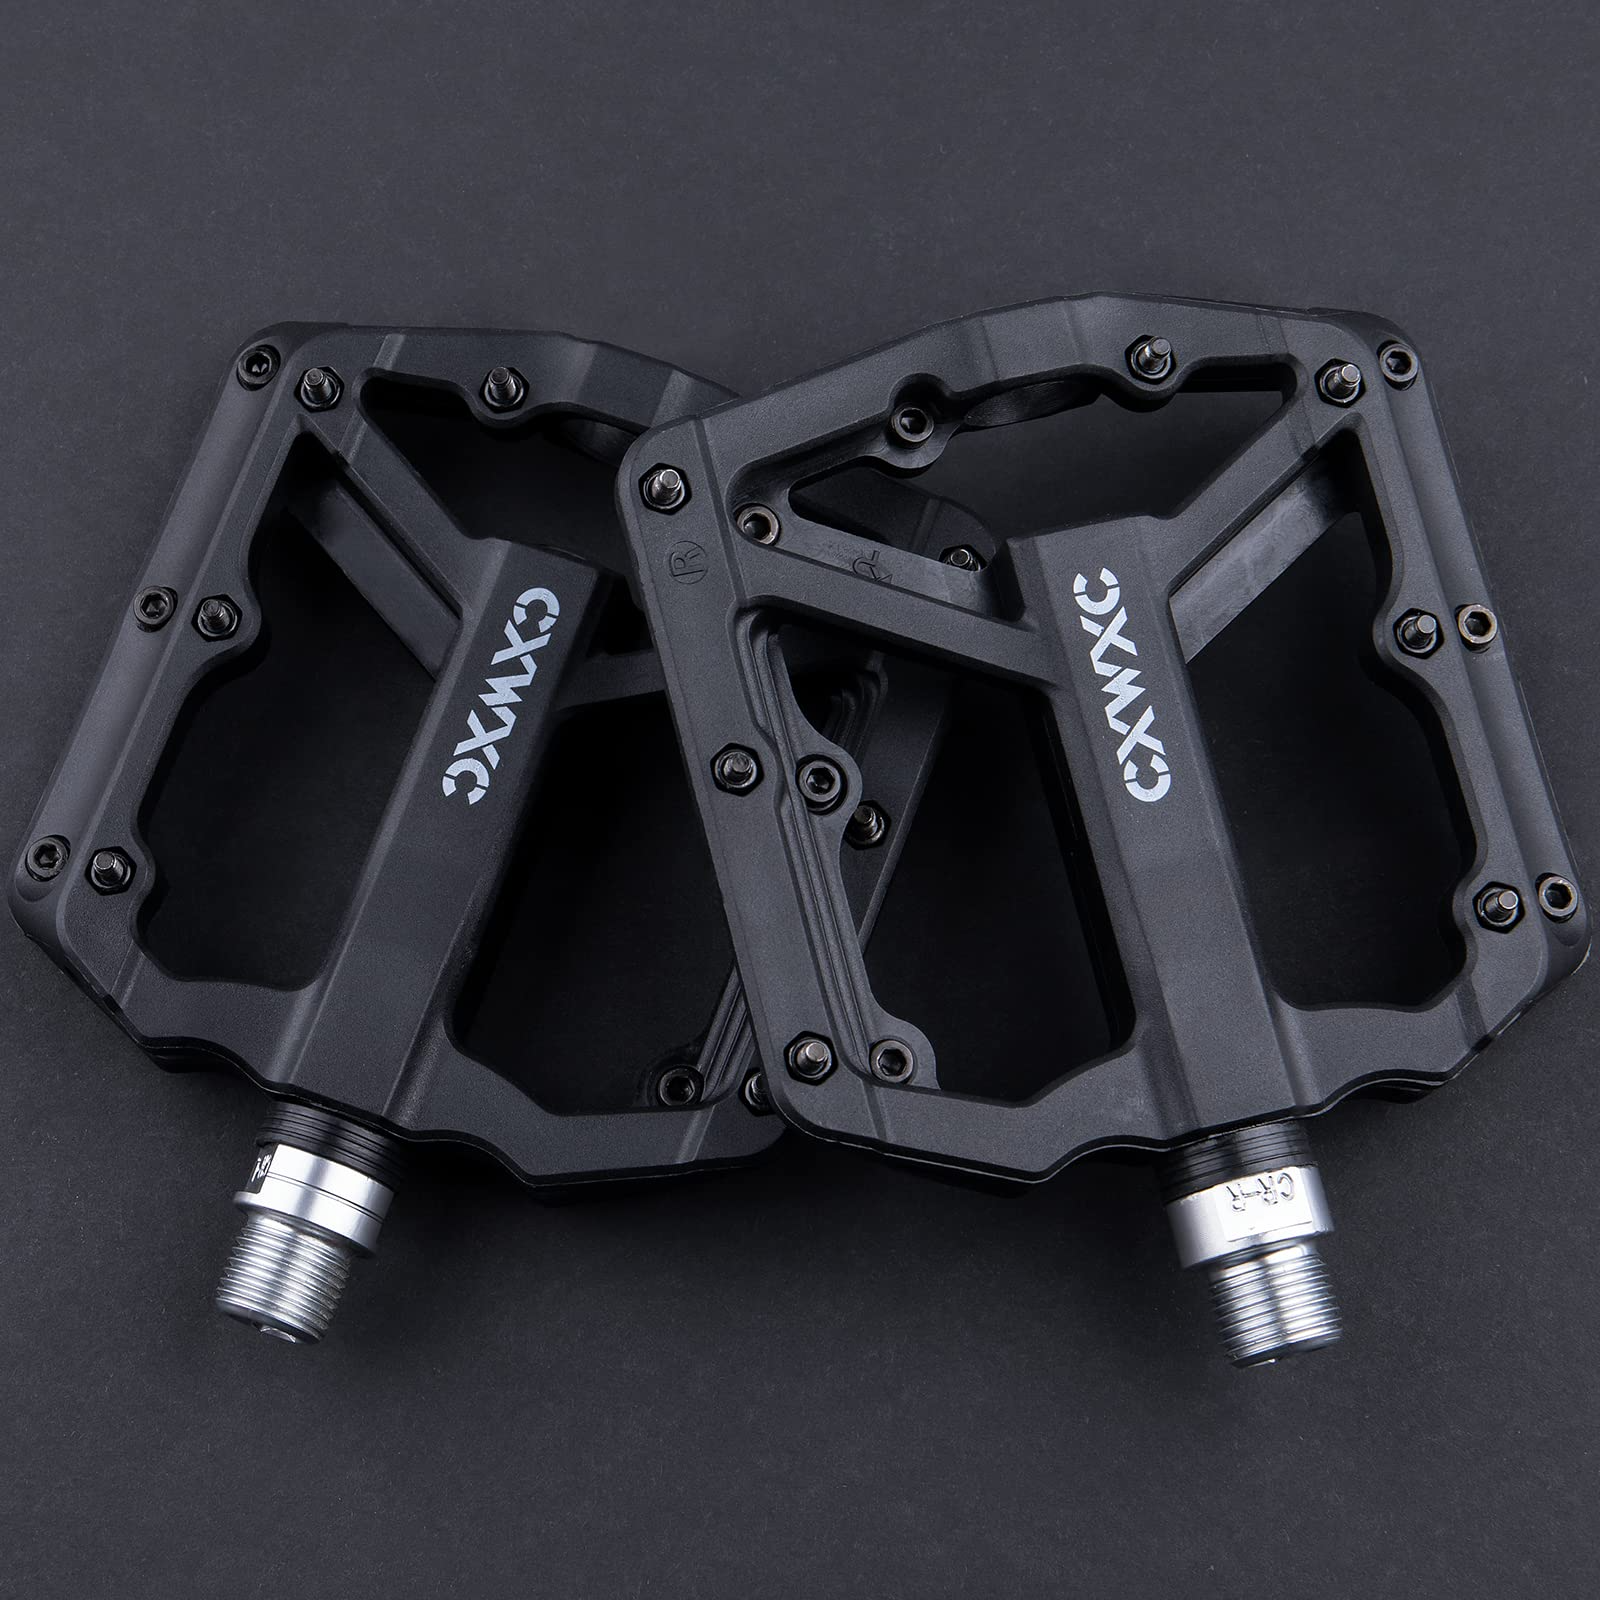 Mountain Bike Pedals - Lightweight Nylon Fiber Bicycle Pedals with Removable Anti Skid Nails - Bicycle Platform Pedals for MTB 9/16 inches